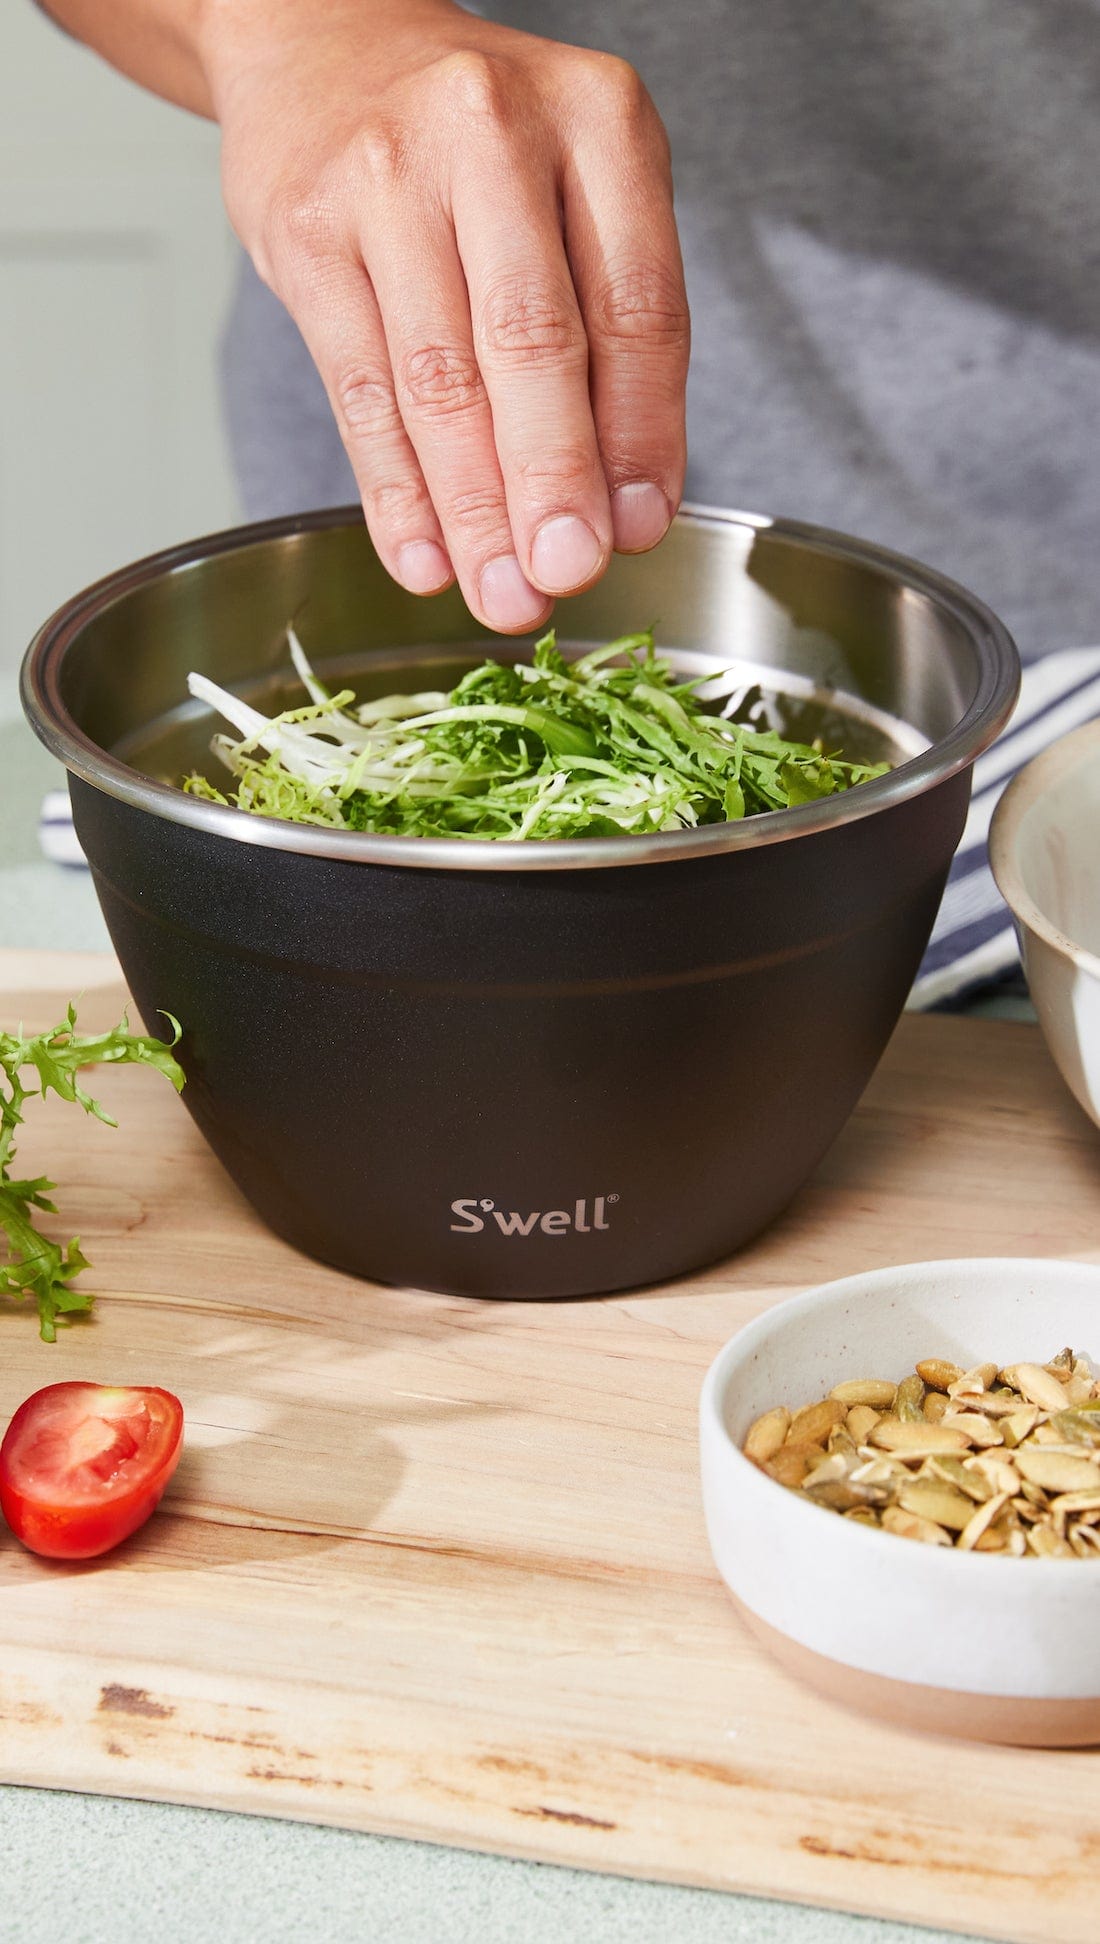 S'well Stainless Steel Salad Bowl Kit - 64oz, Onyx - Comes with 2oz  Condiment Container and Removable Tray for Organization - Leak-Proof, Easy  to Clean, Dishwasher Safe : Sports & Outdoors 